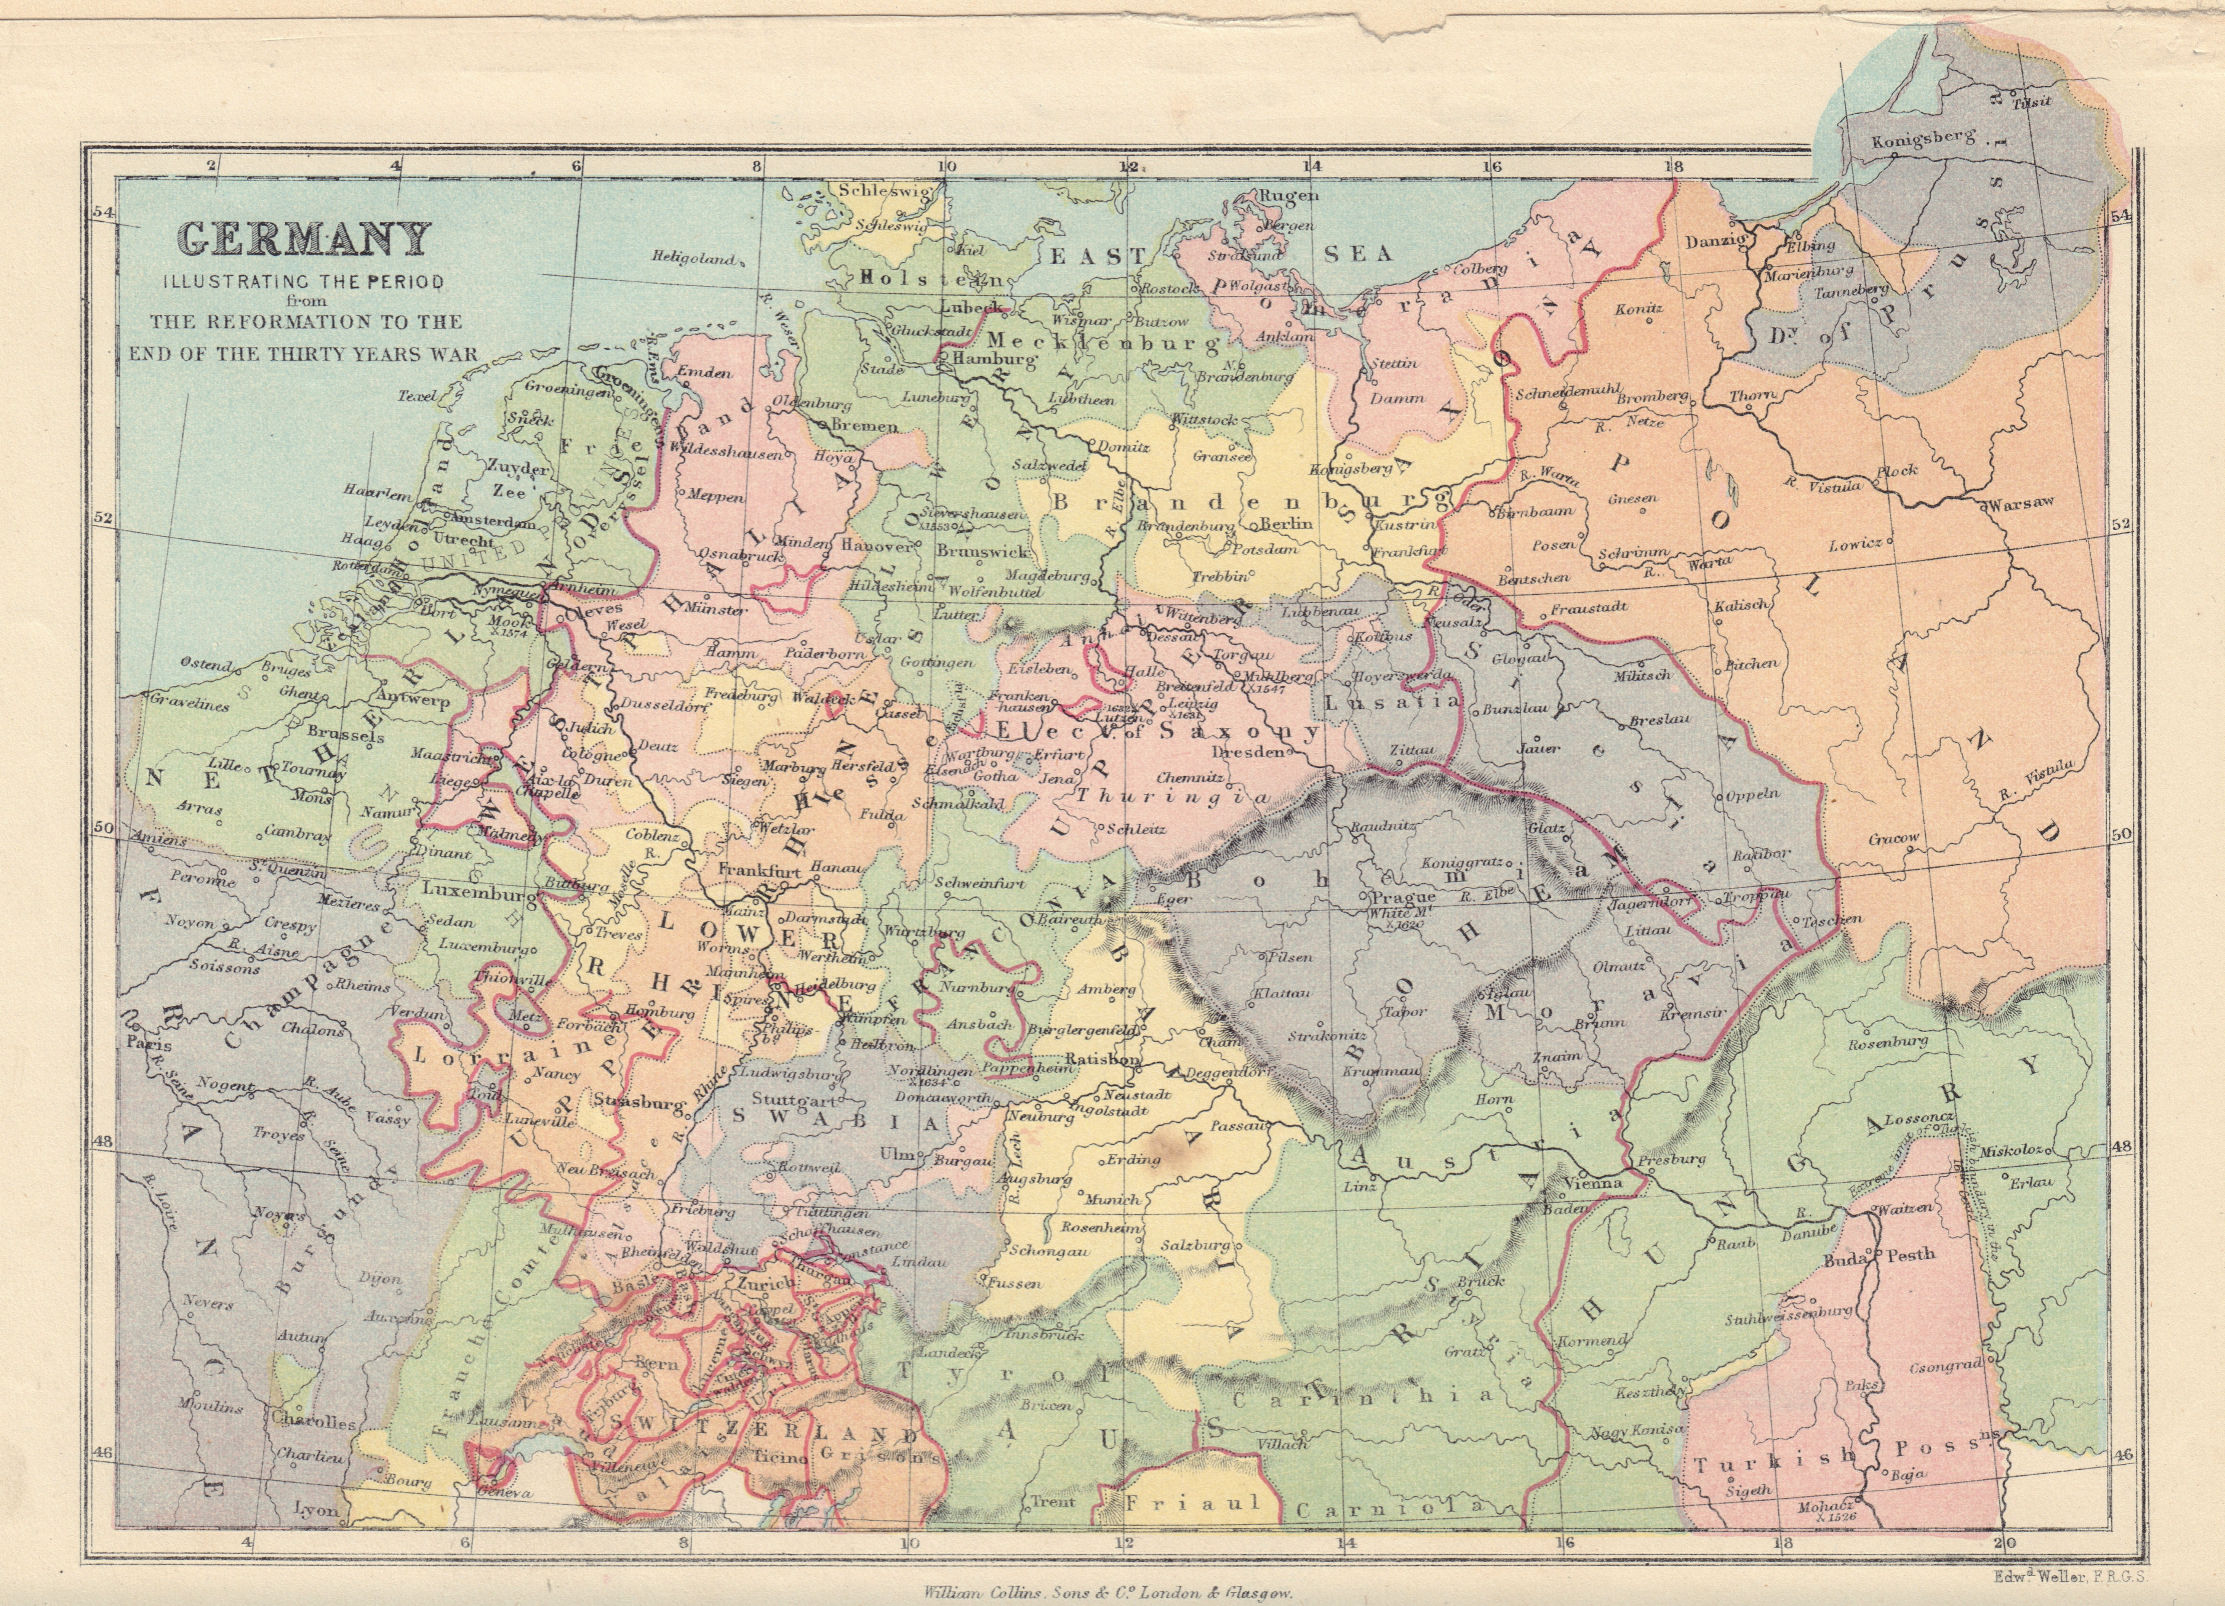 GERMANY from the Reformation to the end of the 30 years war. COLLINS 1873 map